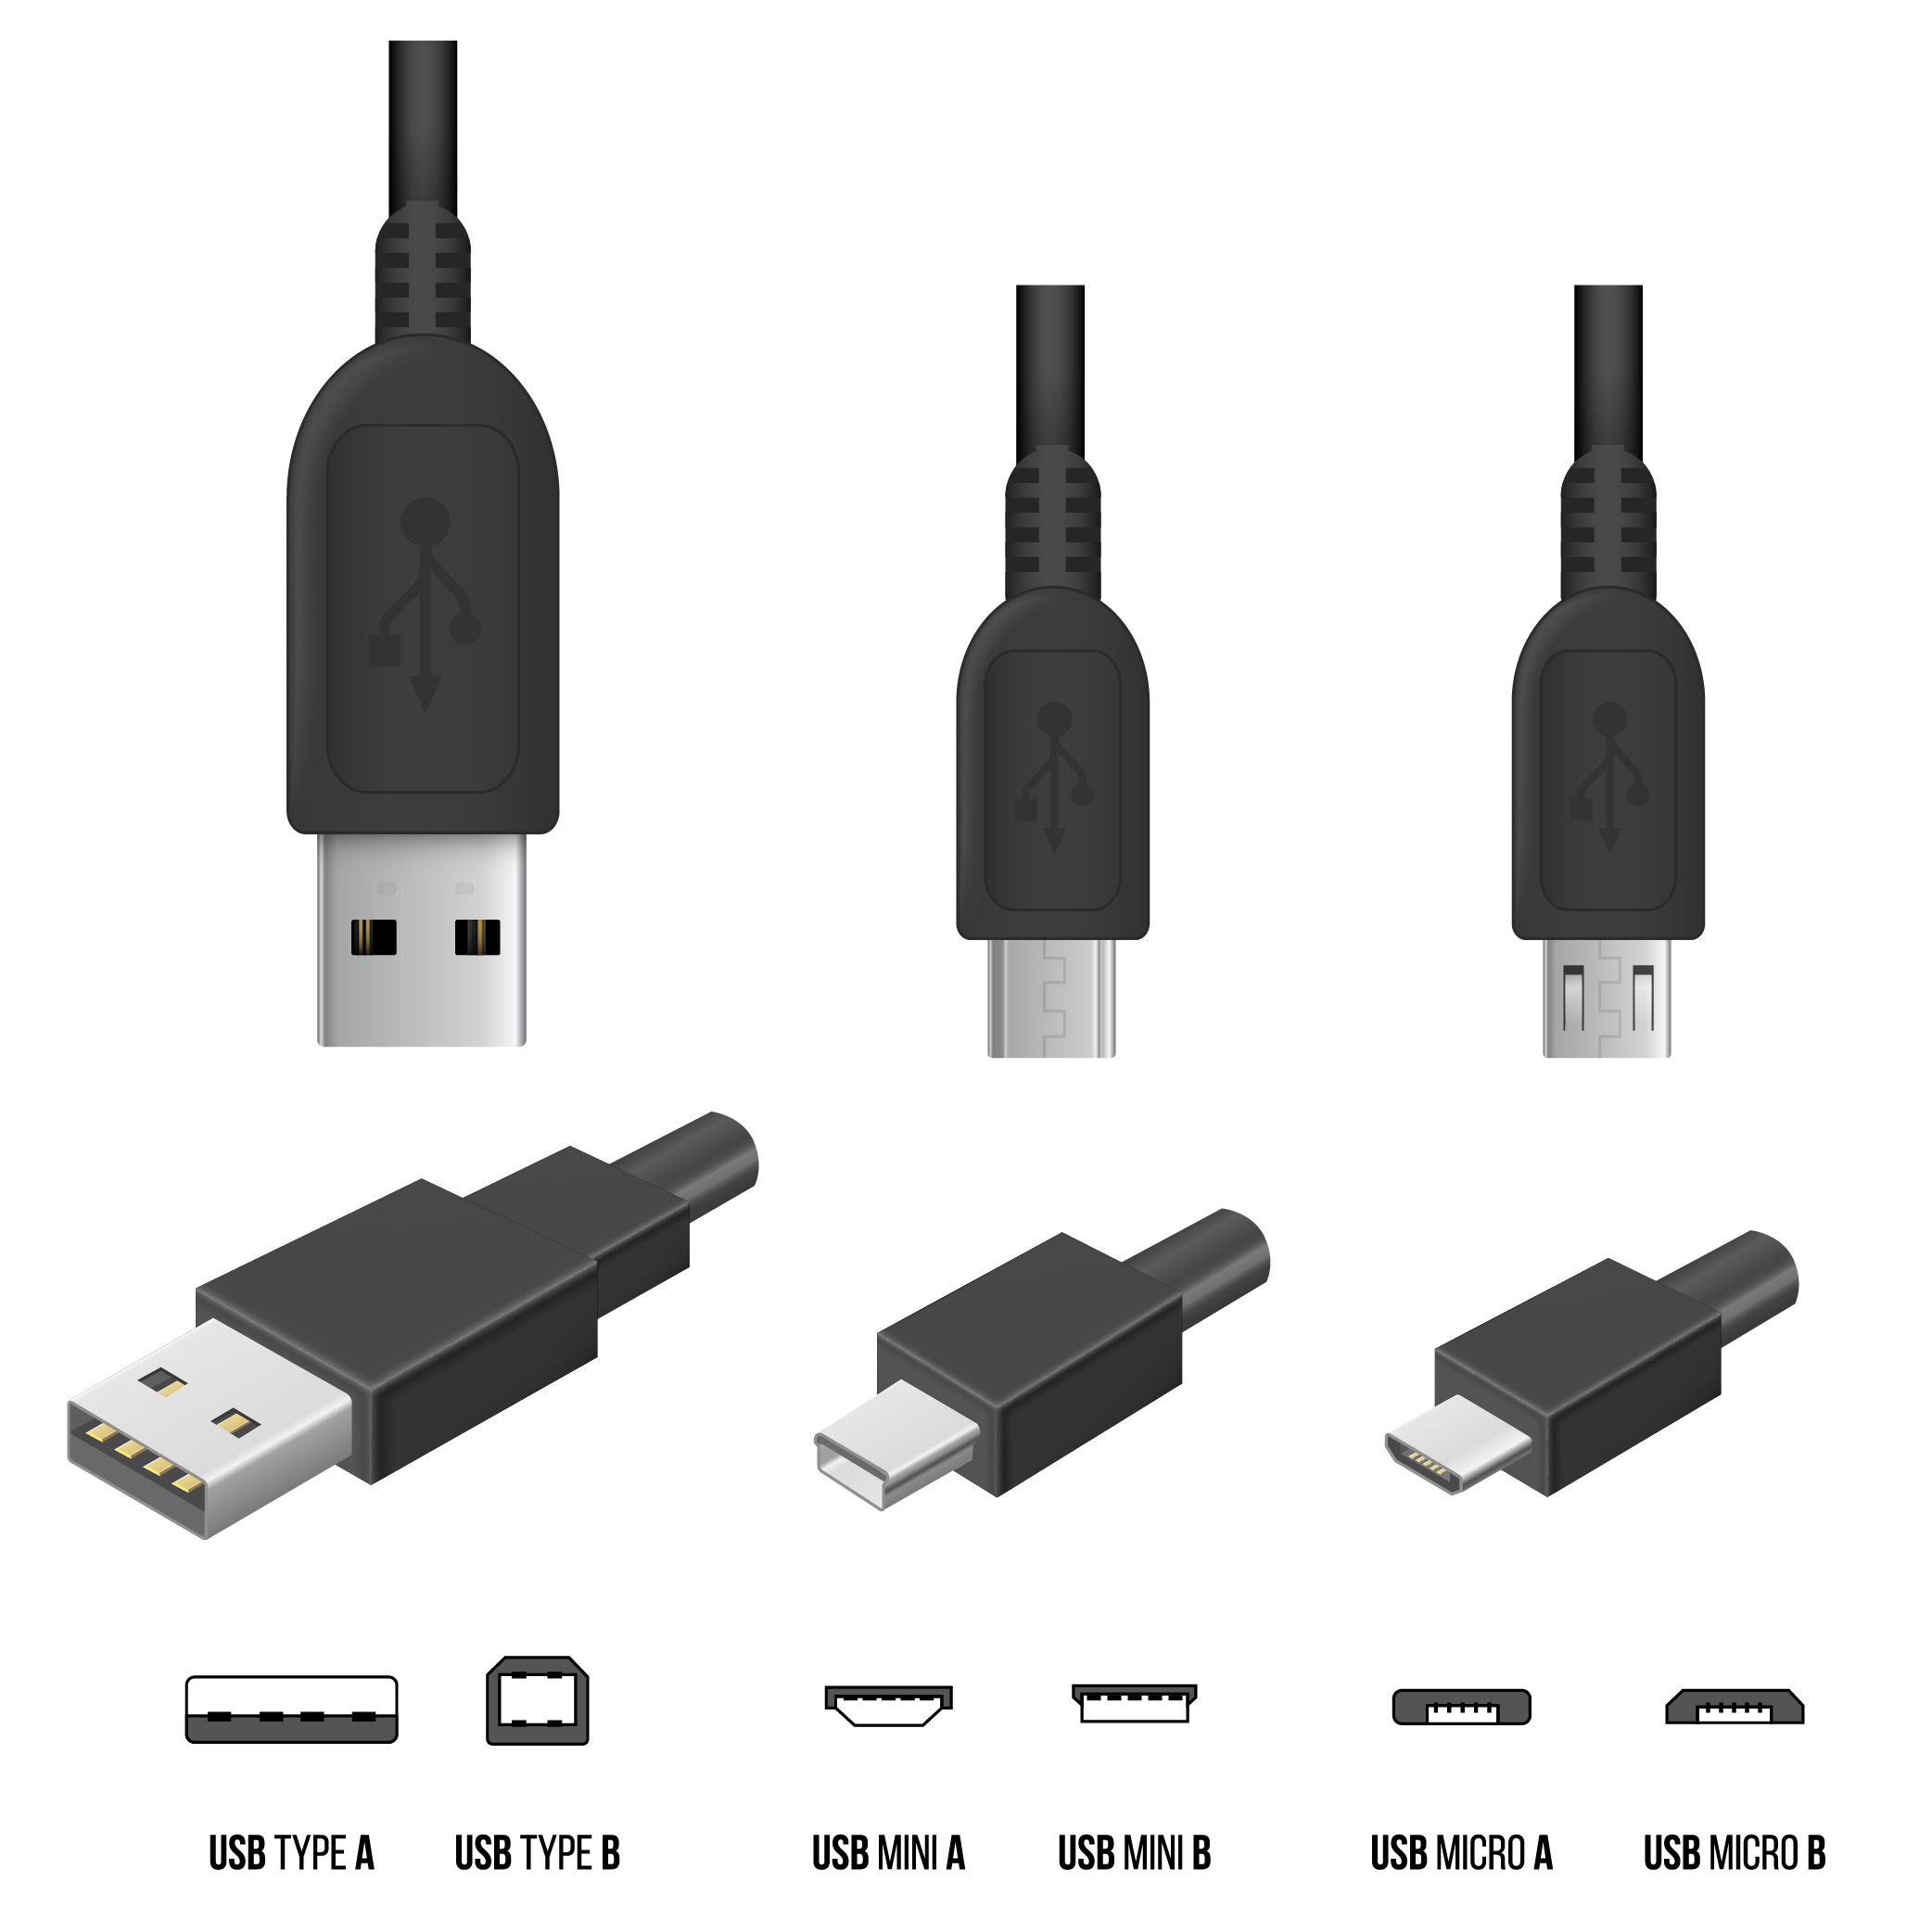 Mini USB vs. Micro USB: What s the Difference?